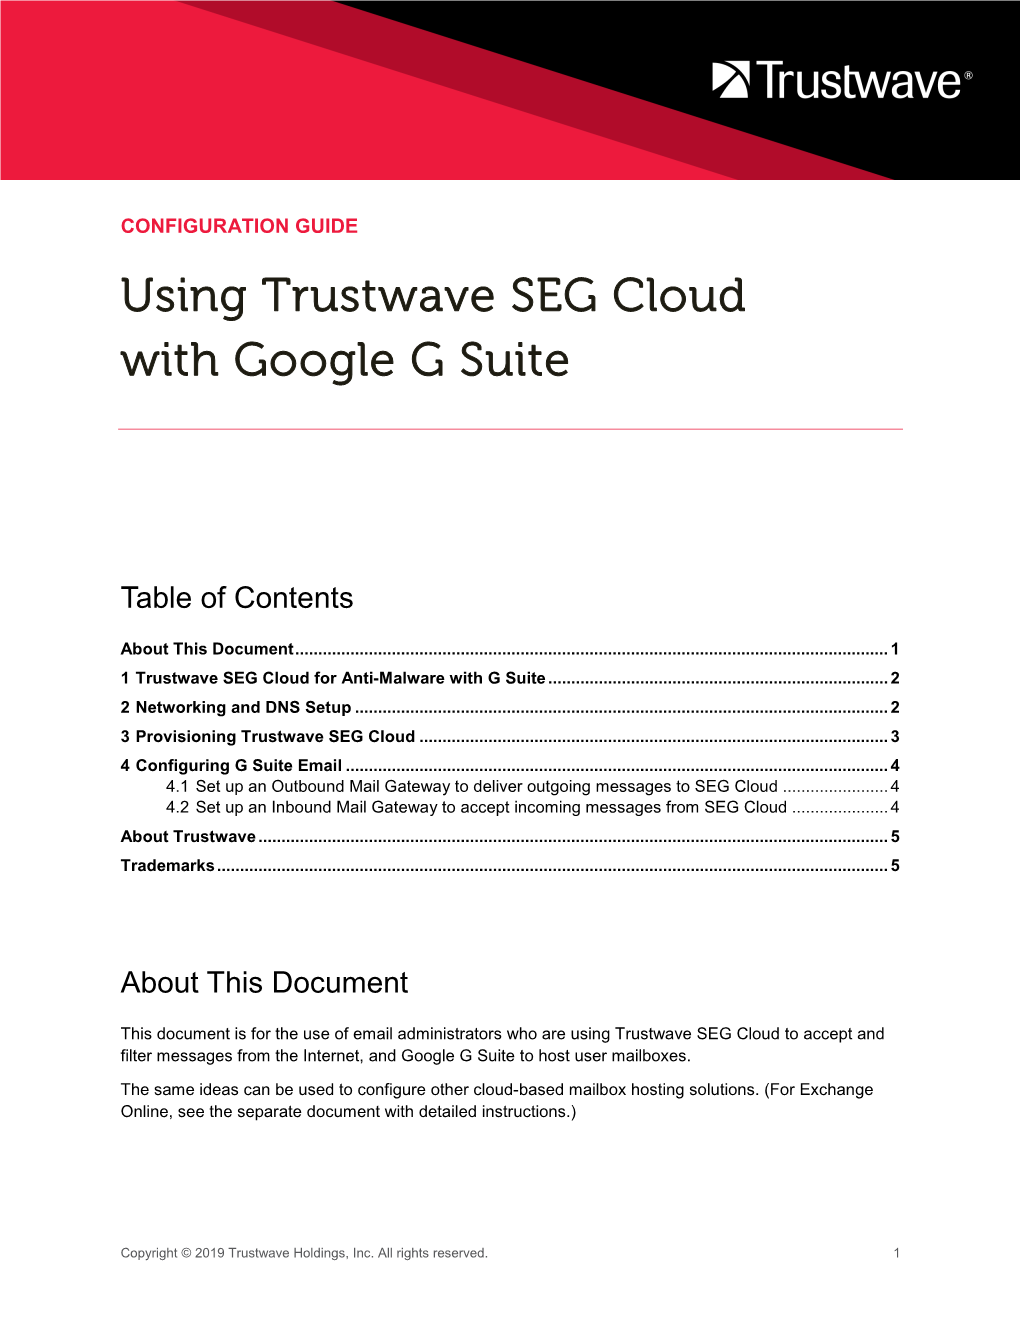 Using SEG Cloud with Google G Suite Email